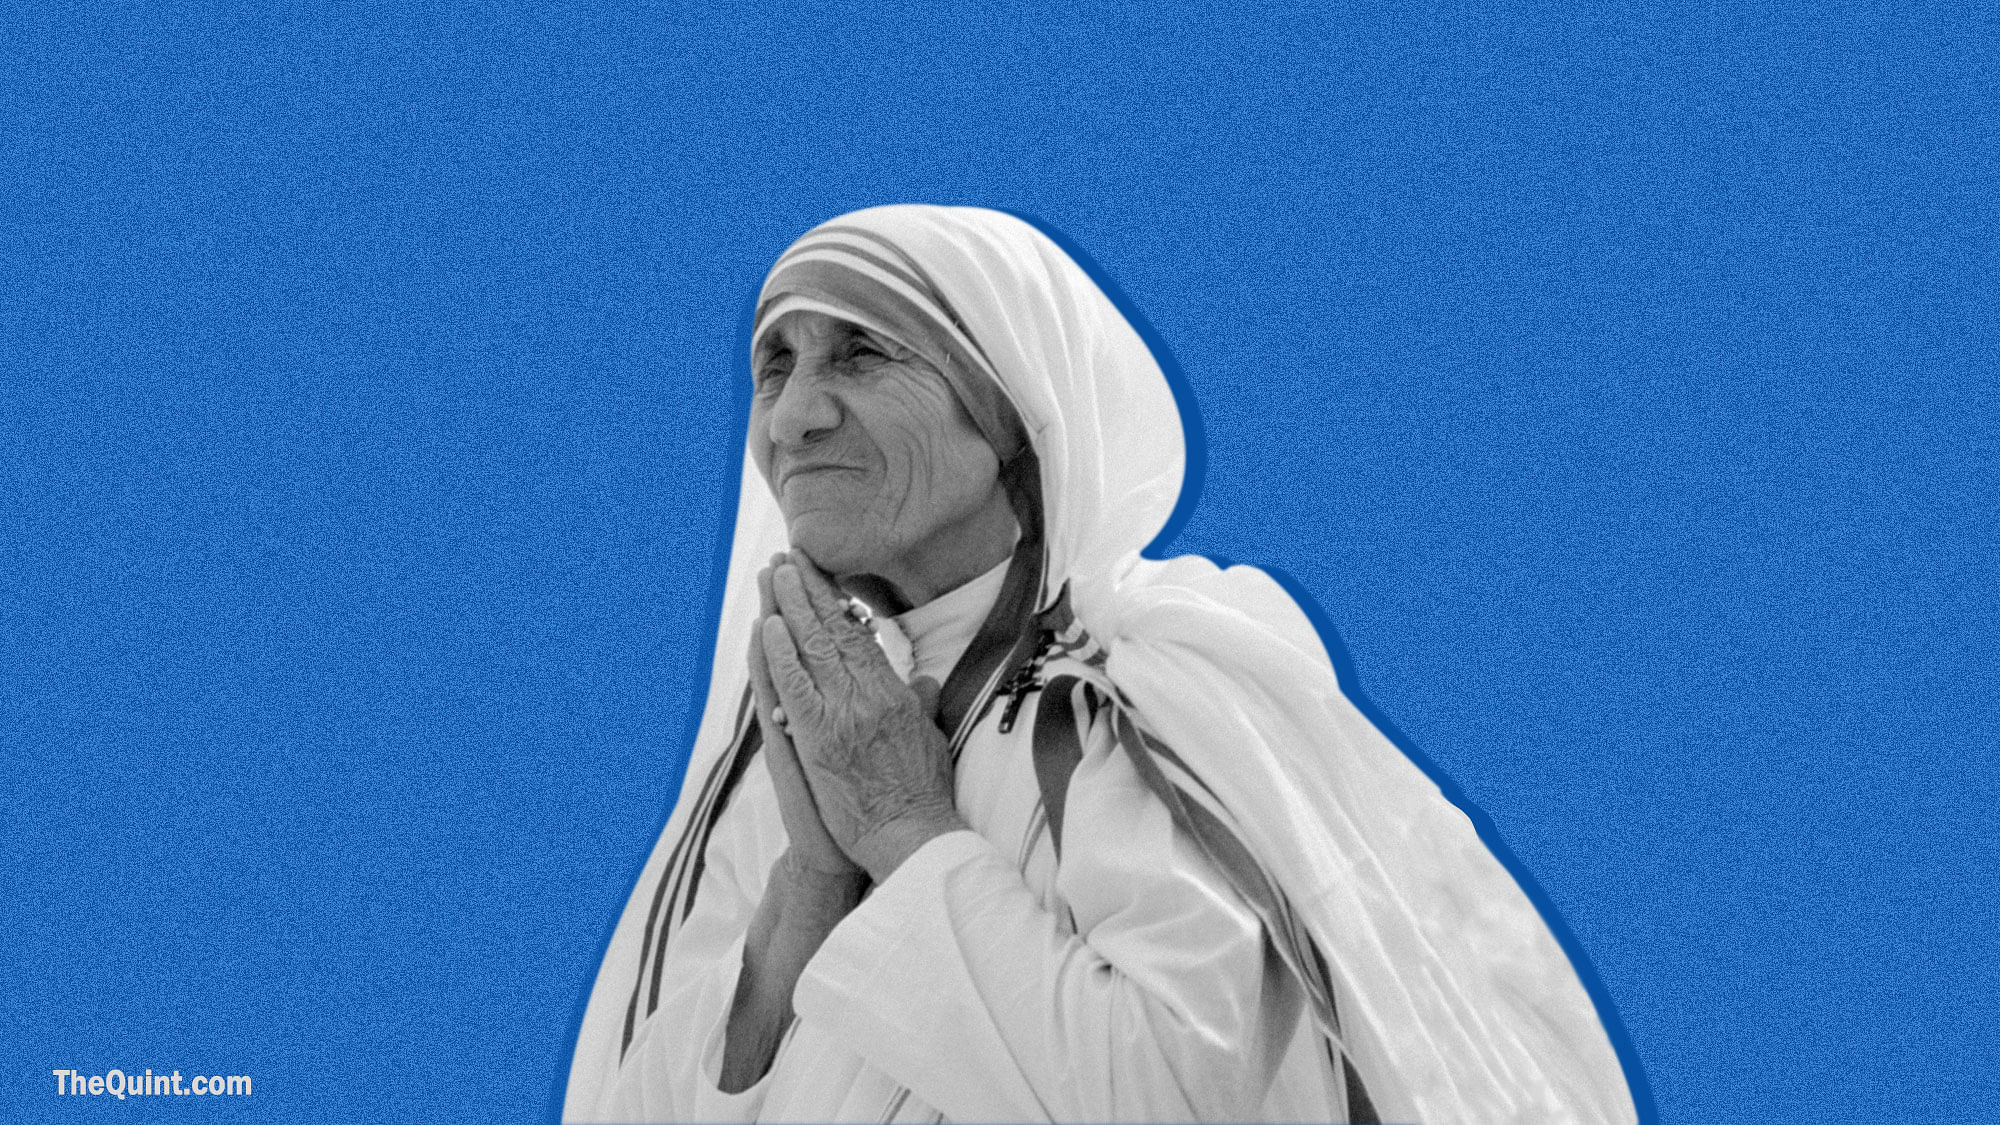 Hundreds participate in the ceremony, in which Mother Teresa was declared as co-patroness of Archdiocese of Kolkata